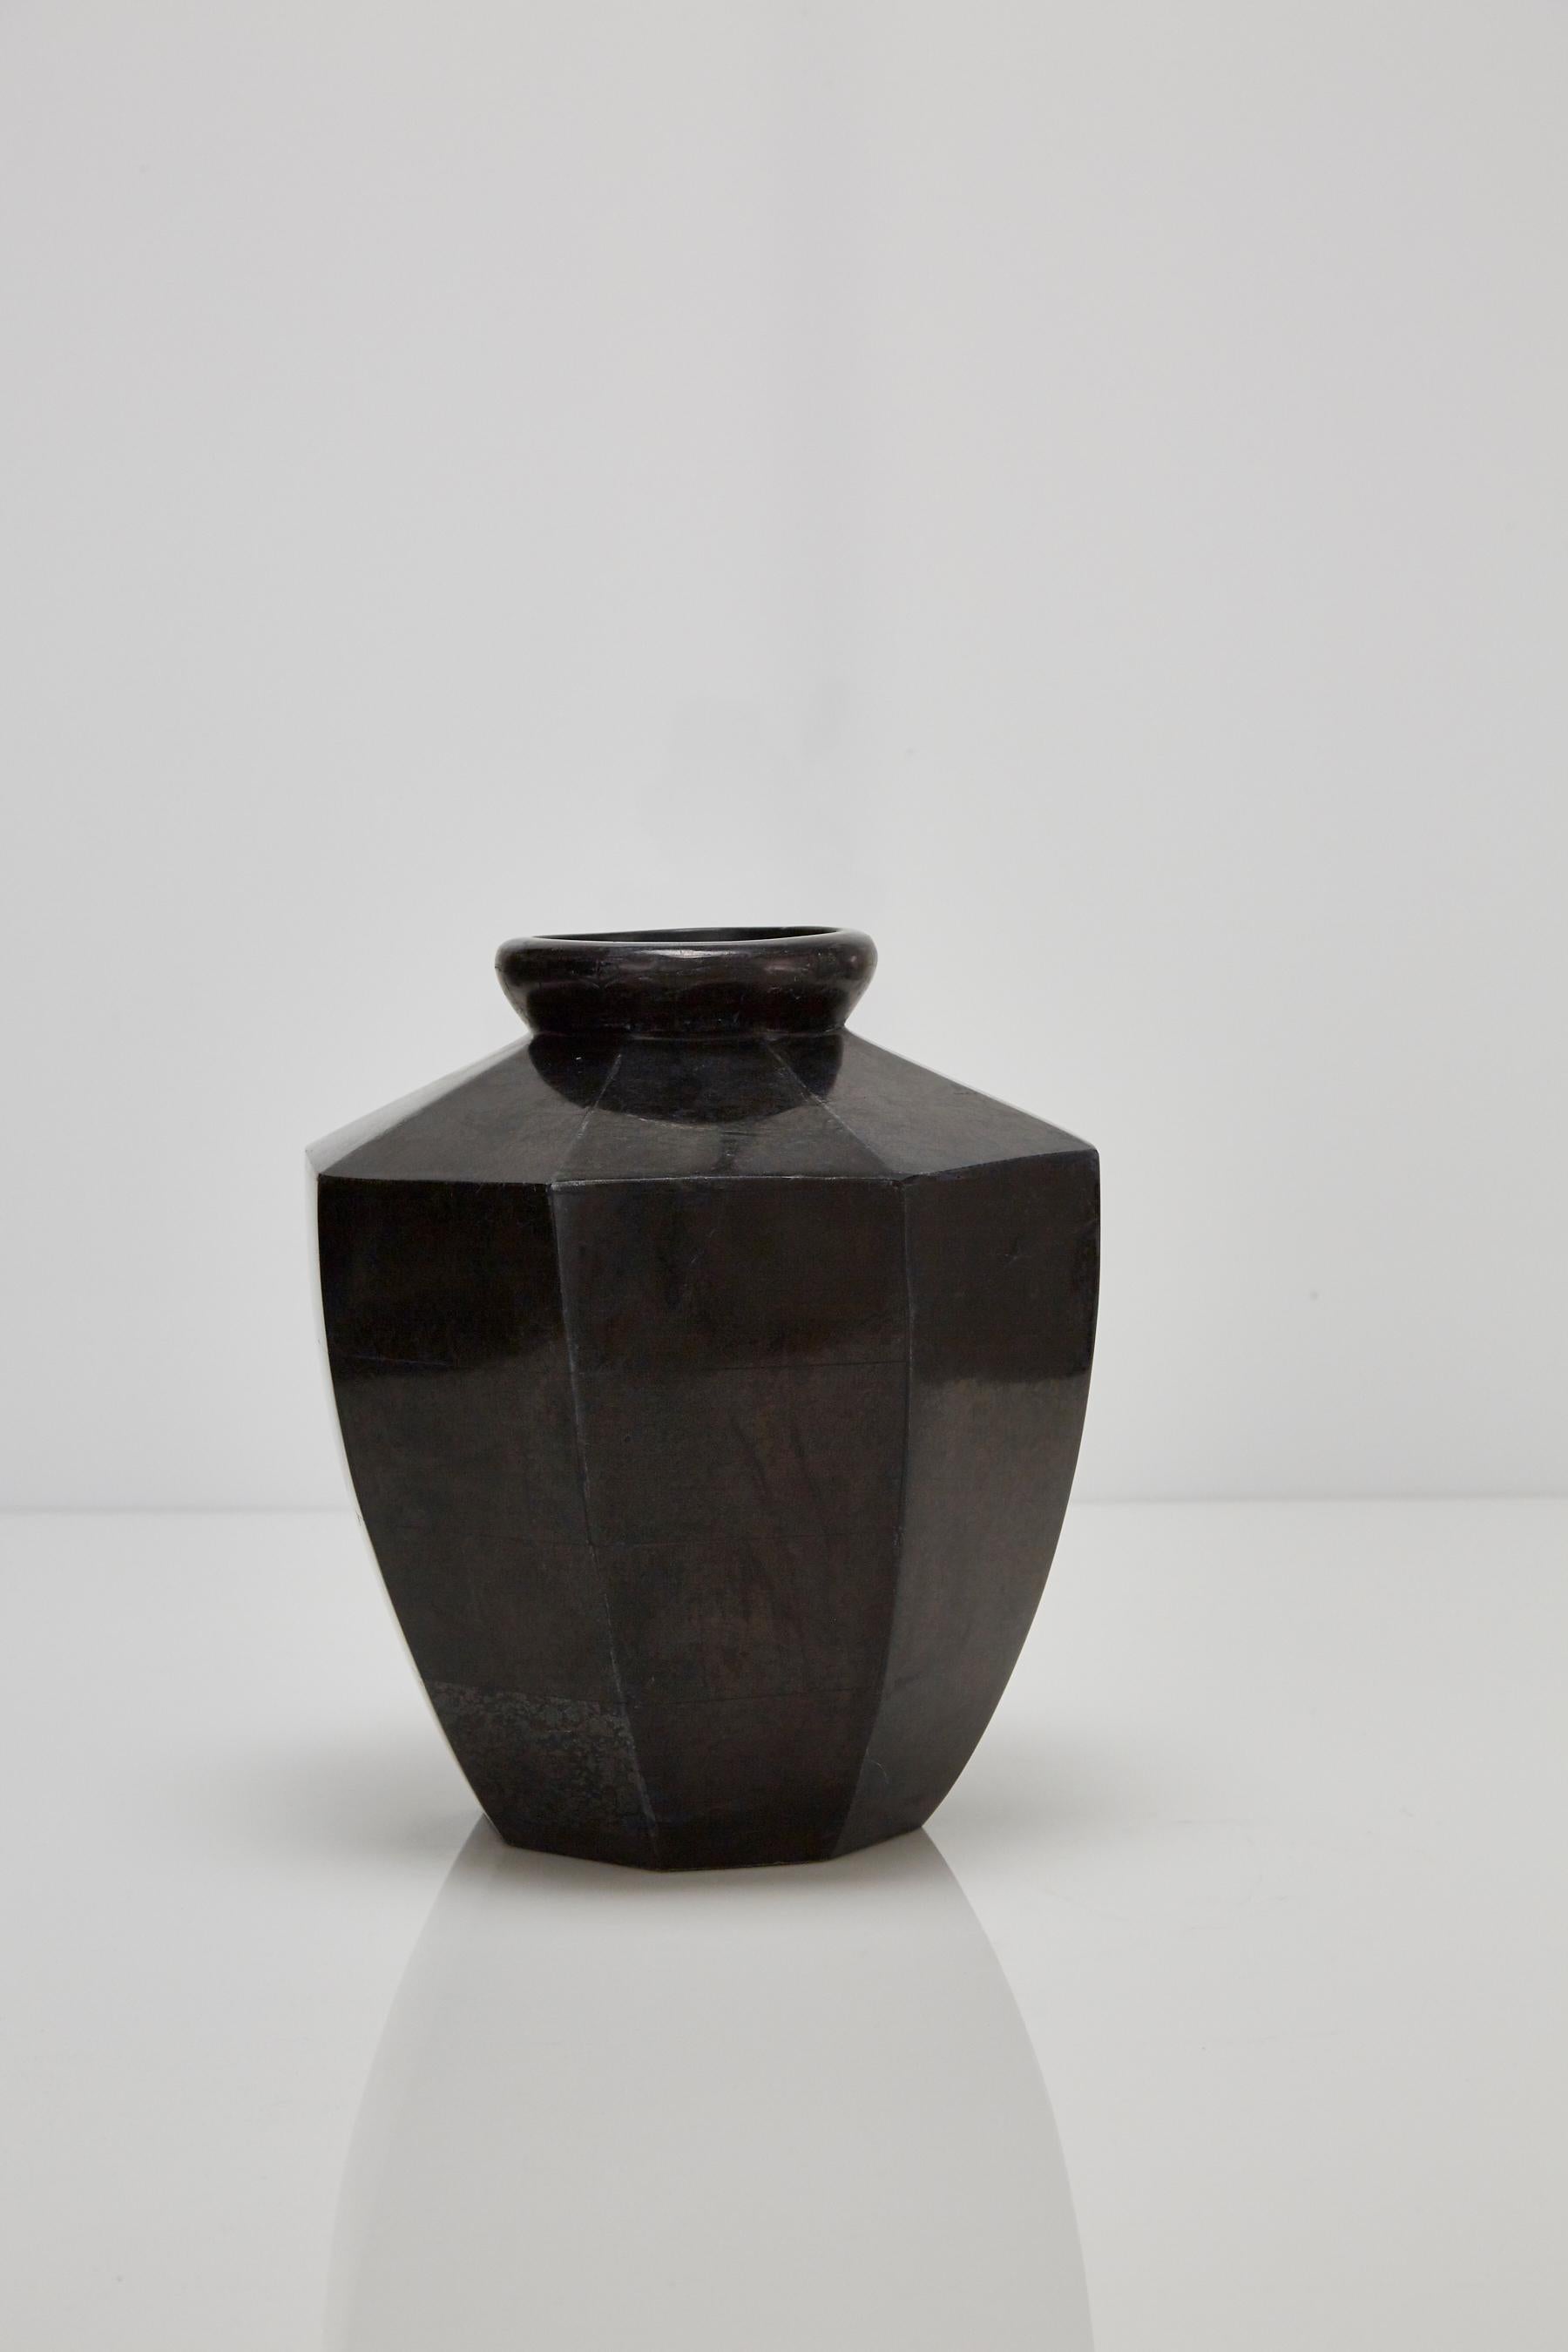 Inlay Short Octagonal Vase in Tessellated Black Stone, 1990s For Sale